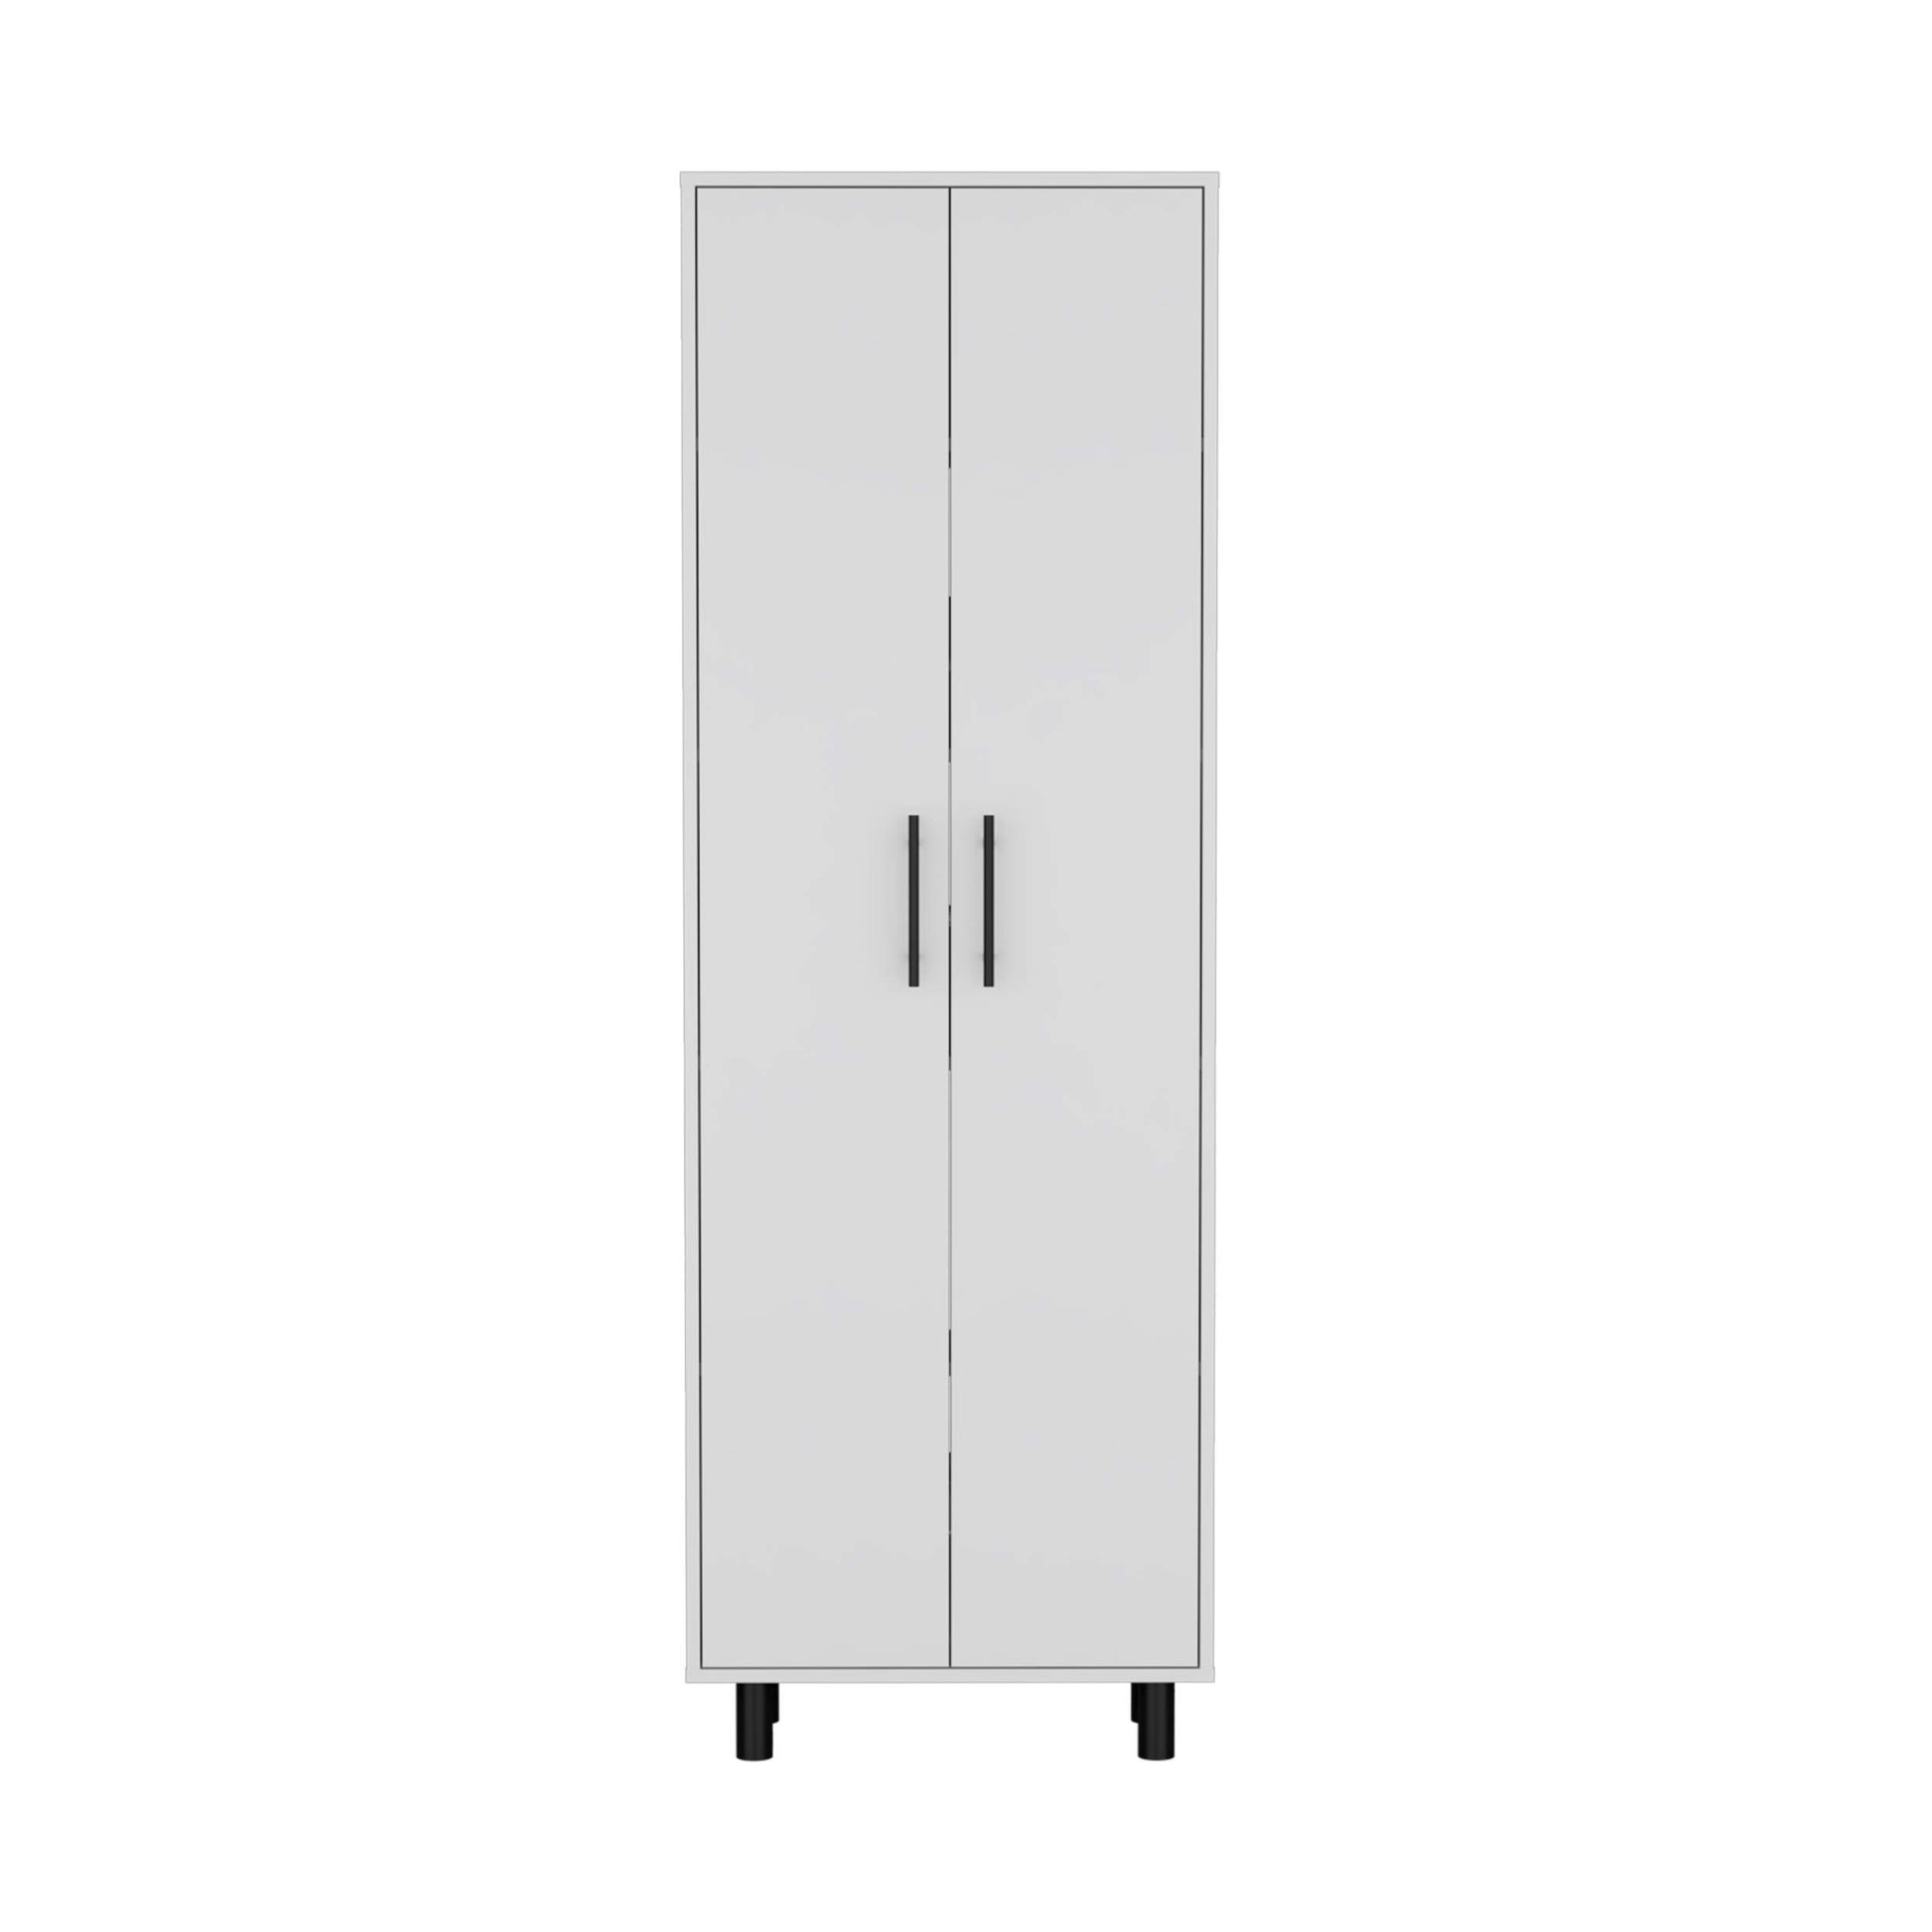 Napoles Multistorage Pantry Cabinet white-particle board-particle board